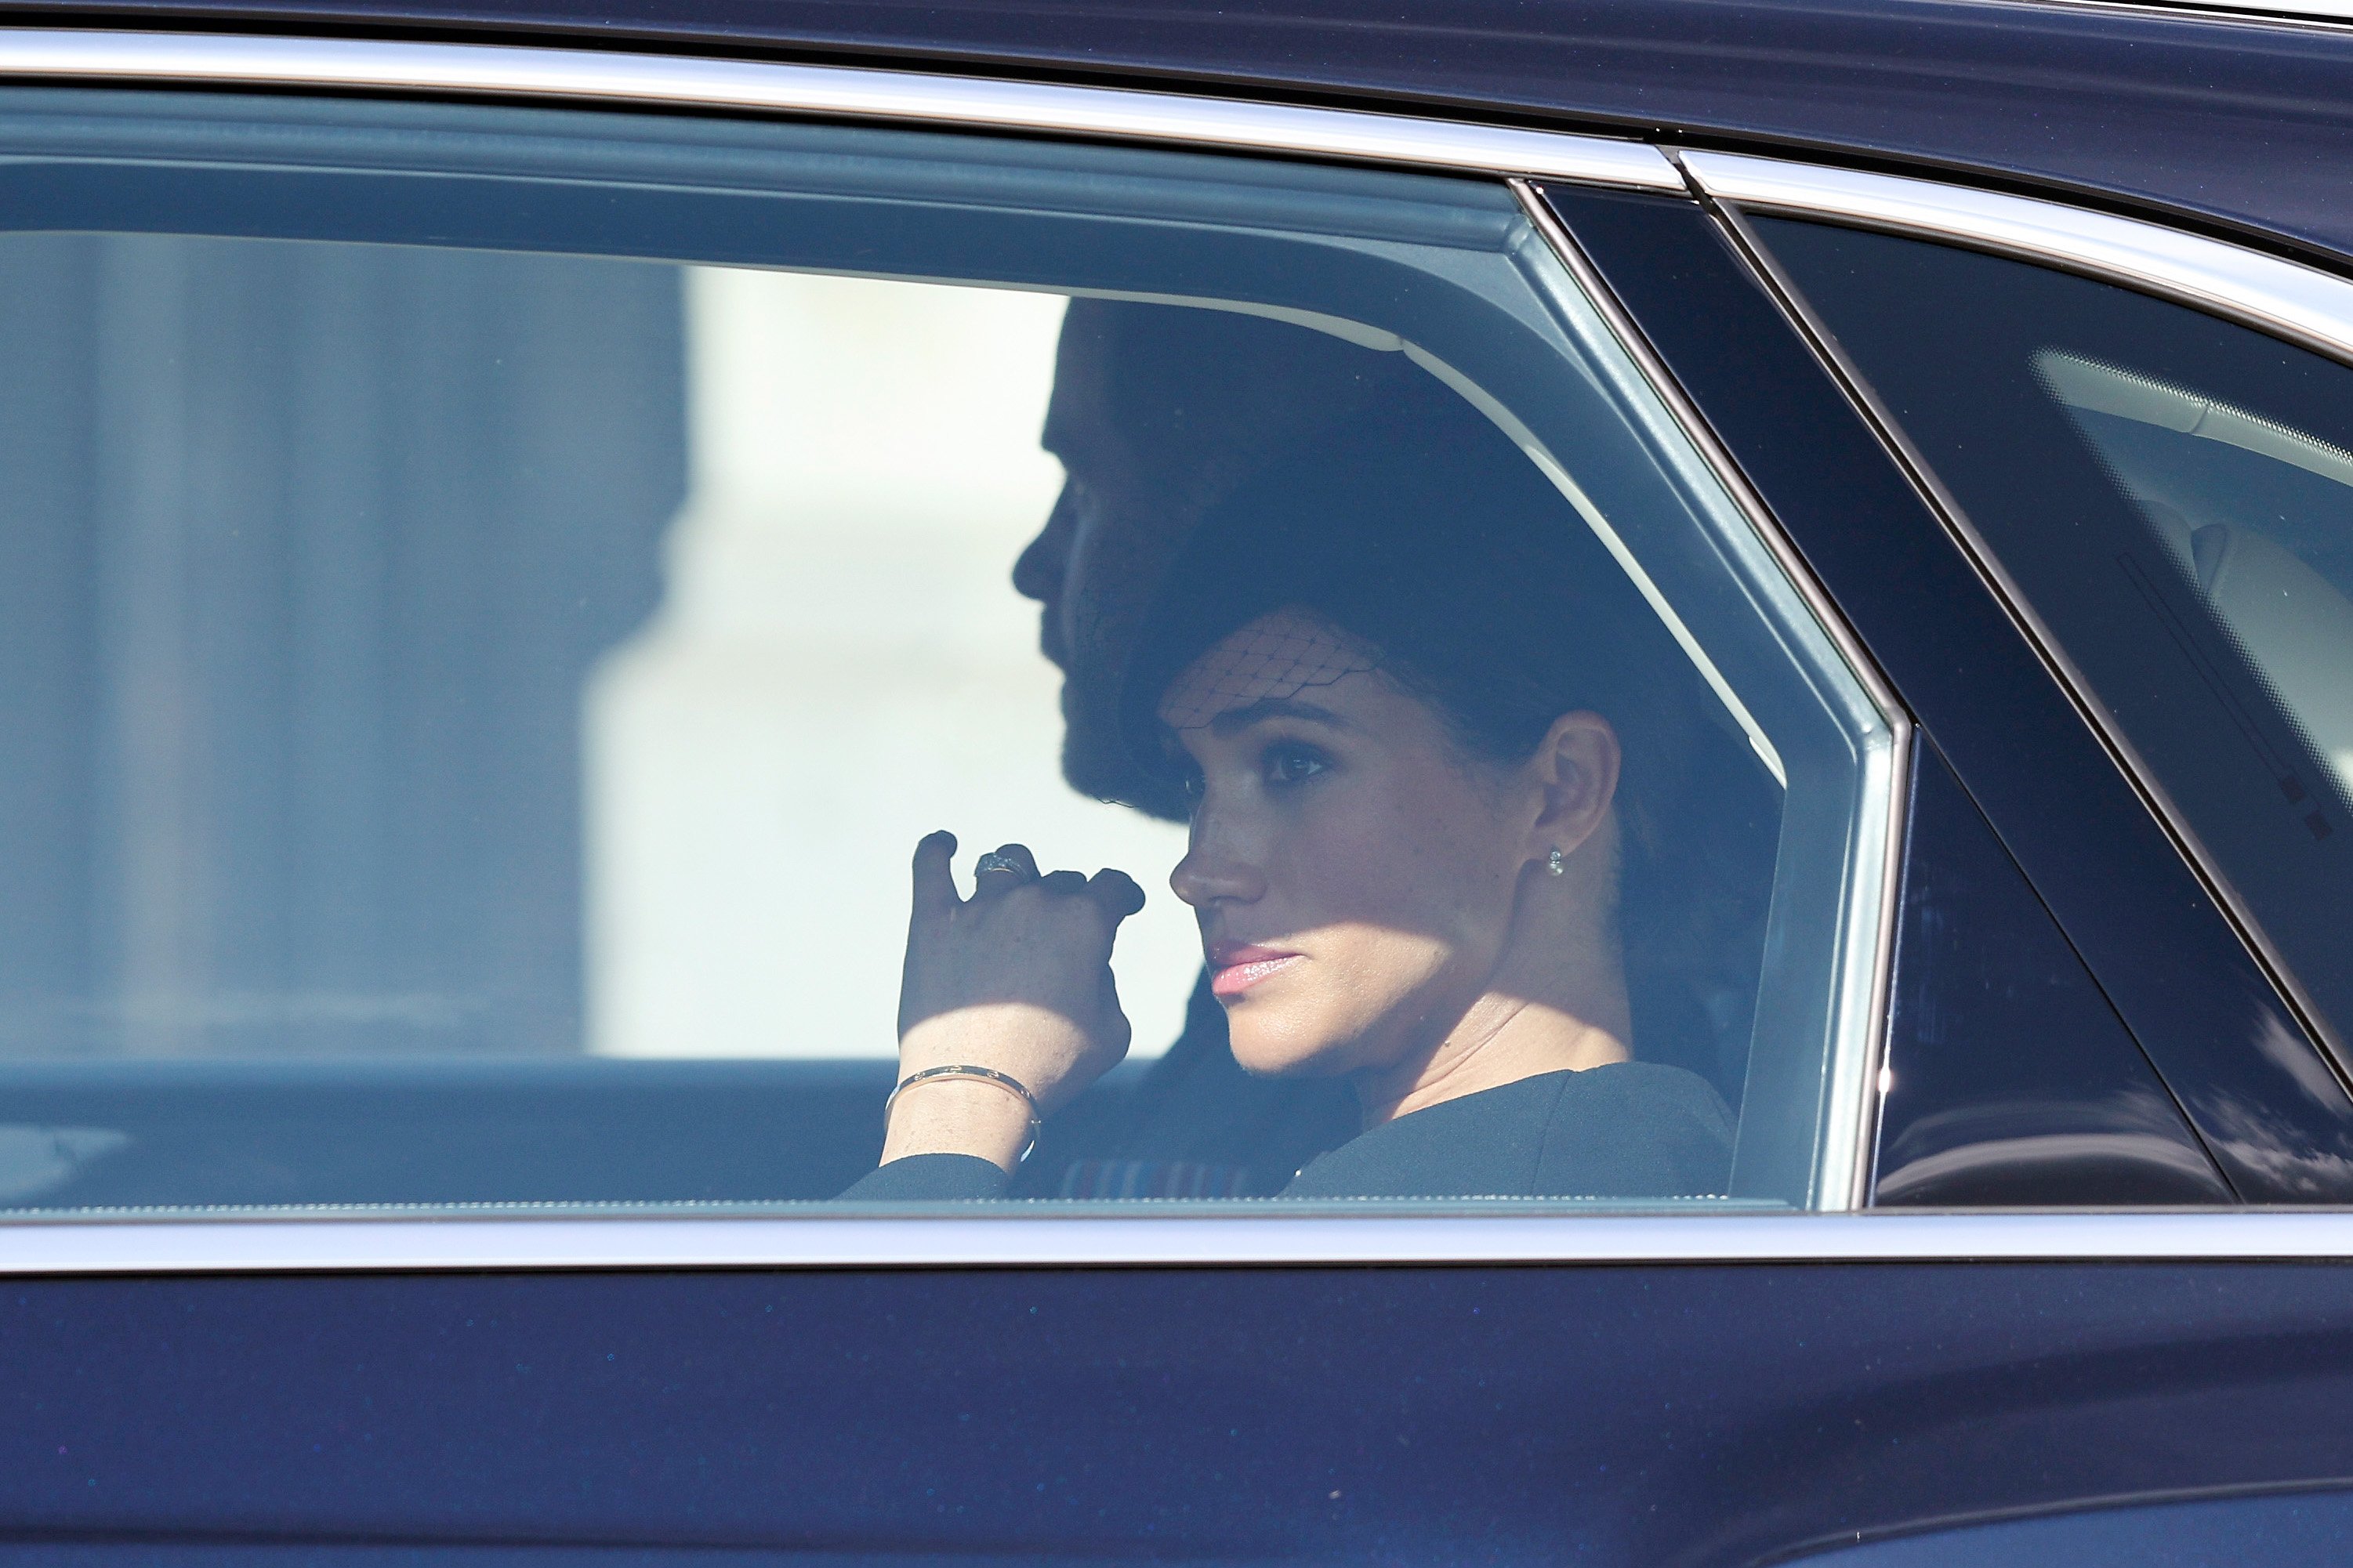 Prince Harry, Duke of Sussex and Meghan, Duchess of Sussex return by car to Buckingham Palace after attending a service for the reception of Queen Elizabeth II's coffin on September 14, 2022 in London, England | Source: Getty Images